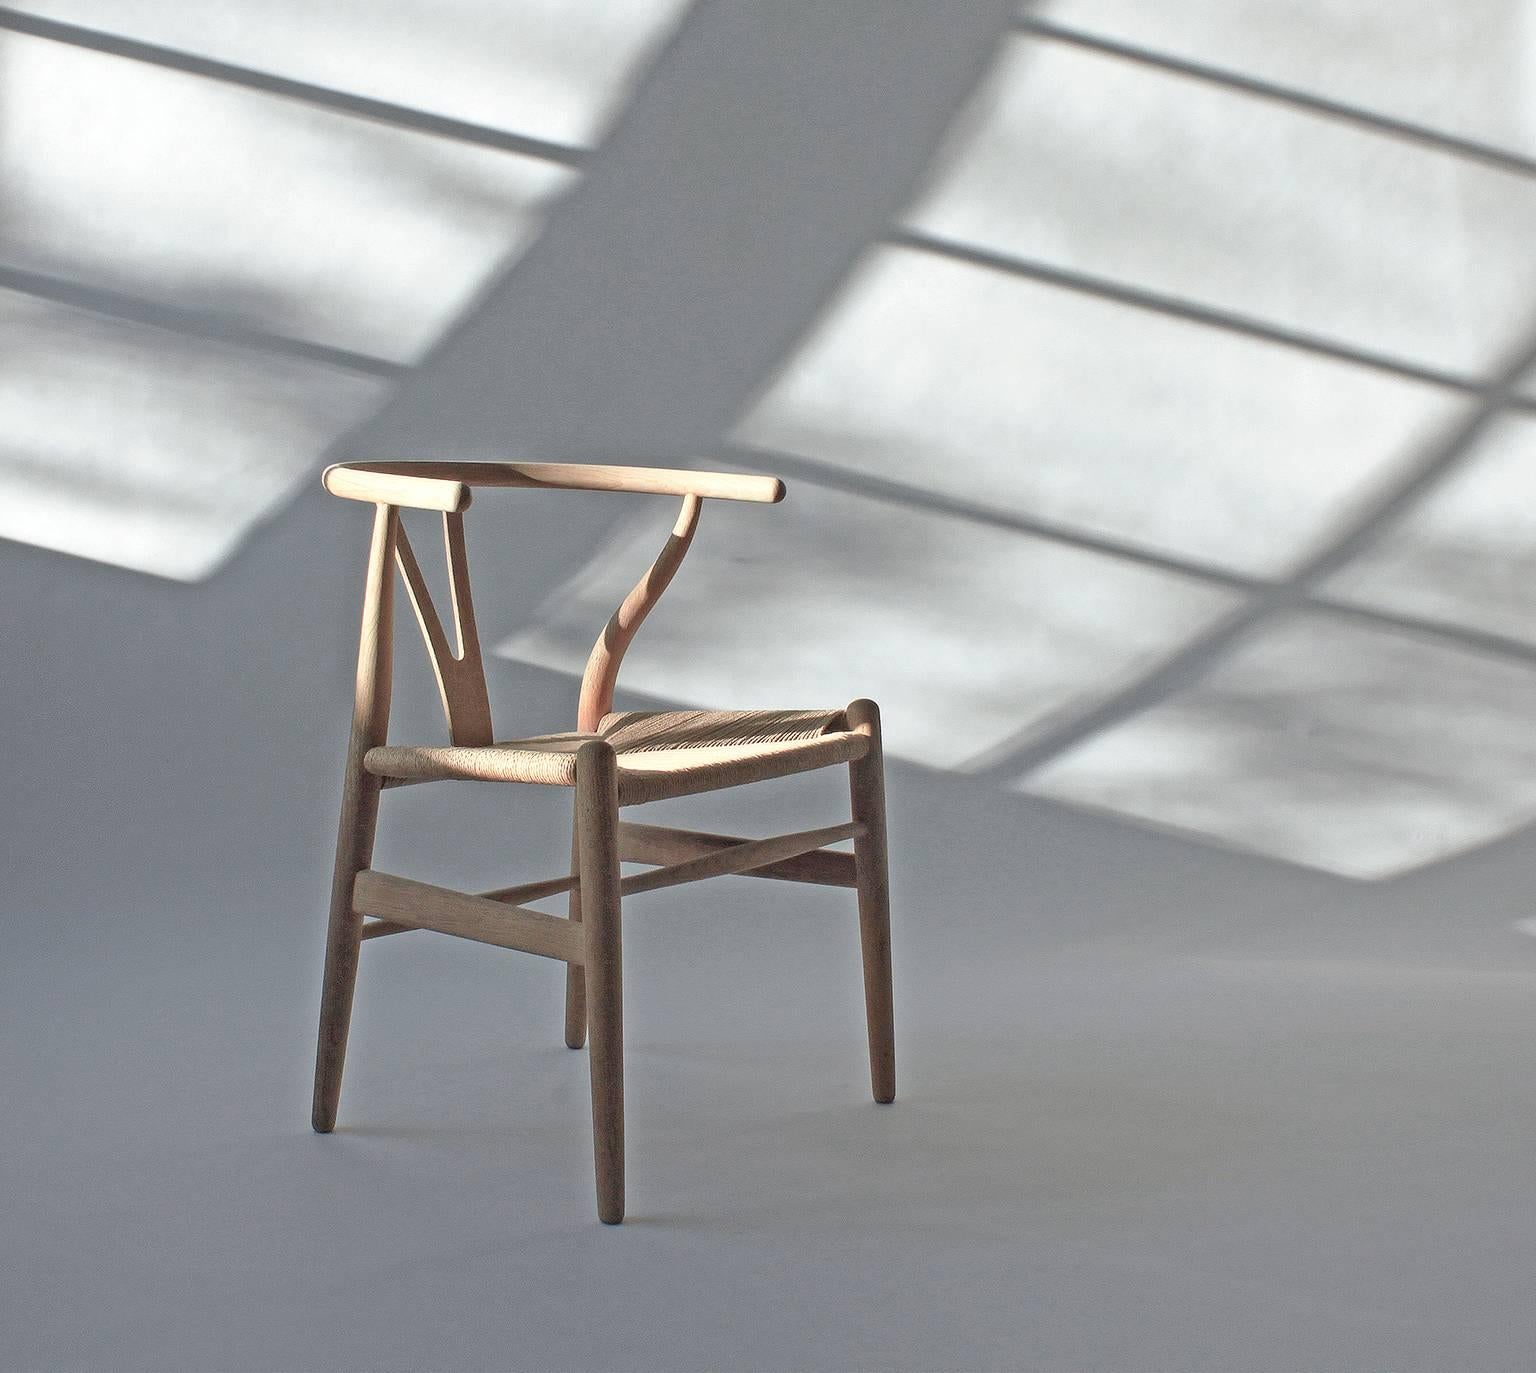 An oak Wishbone chair, called the Y-stole in Denmark due to the Y-shaped structure at the back. Designed by Hans J Wegner for Carl Hansen & Søn (model CH 24). Seat with woven papercord.